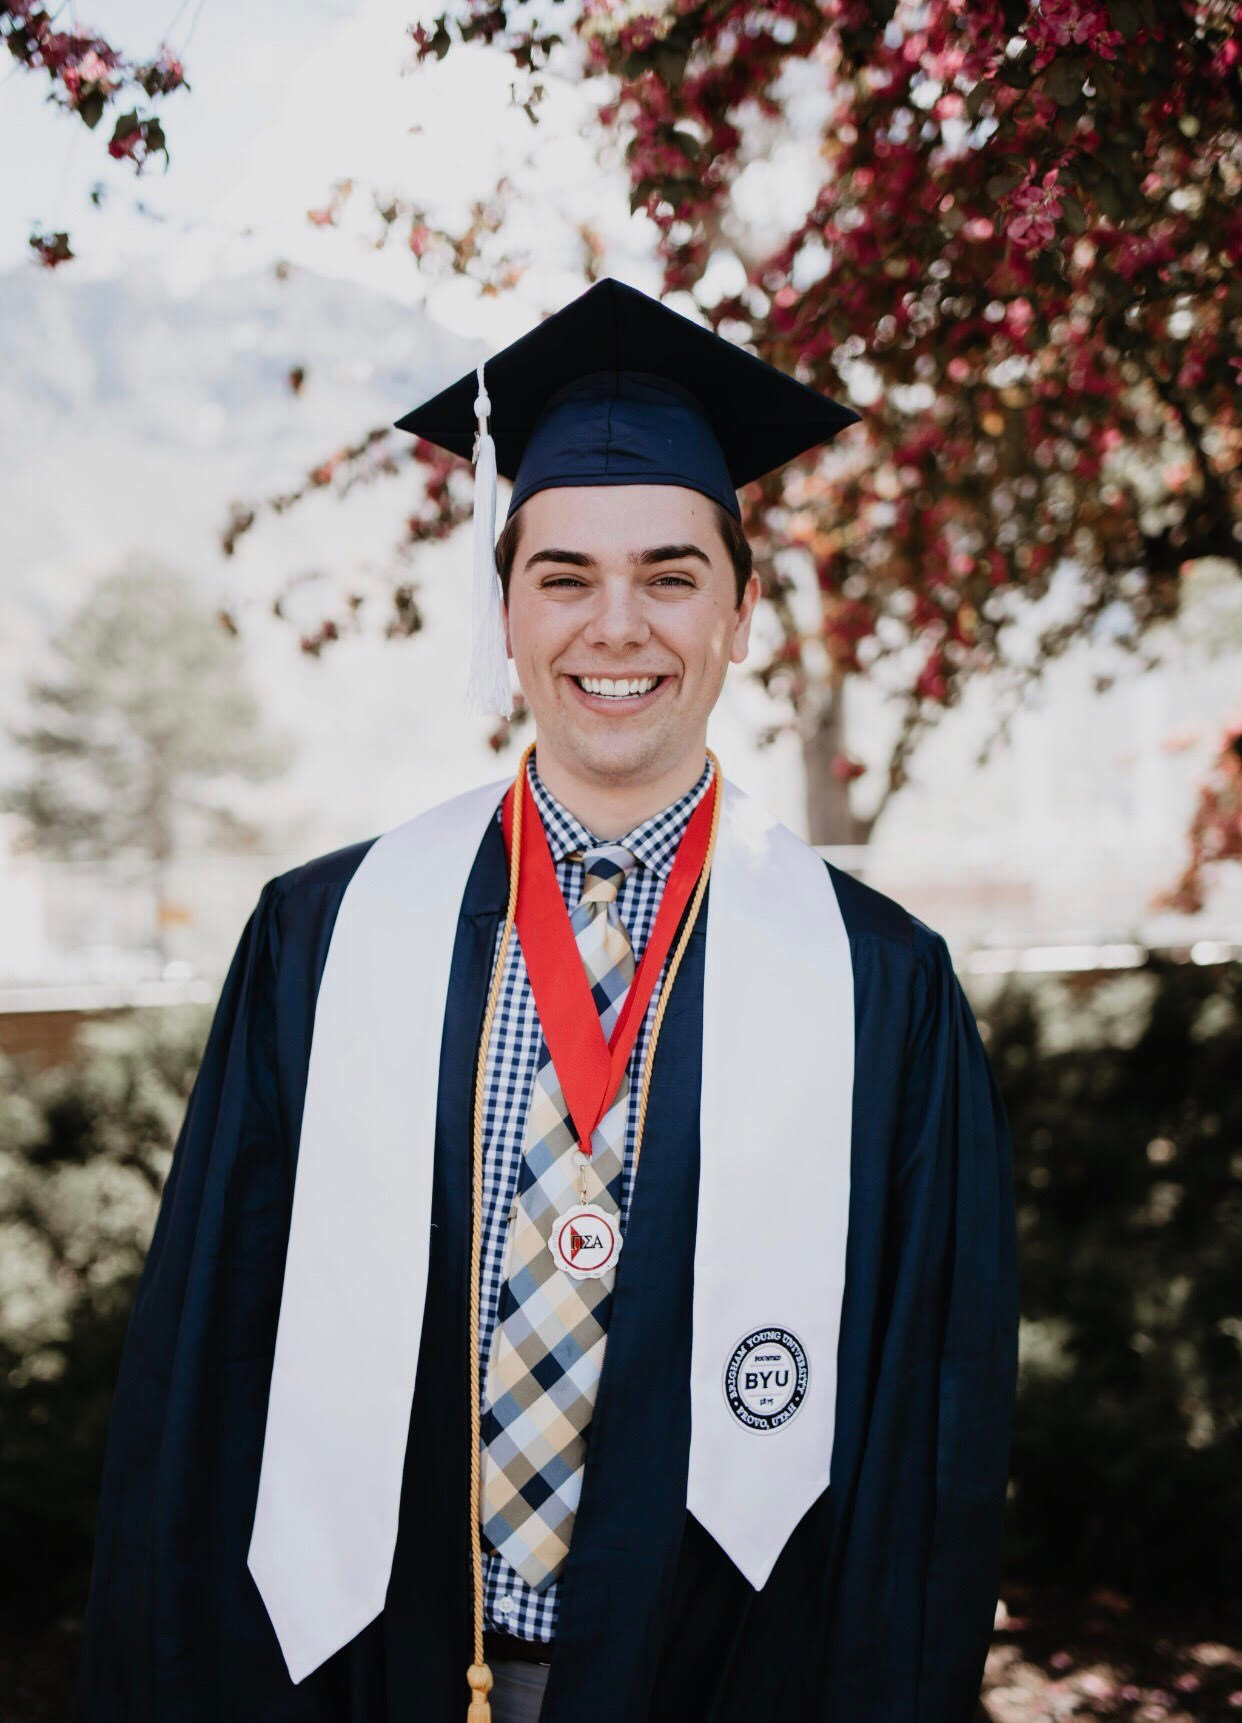 PHOTO: Brigham Young University student Matt Easton came out as gay during his convocation speech on April 26, 2019.